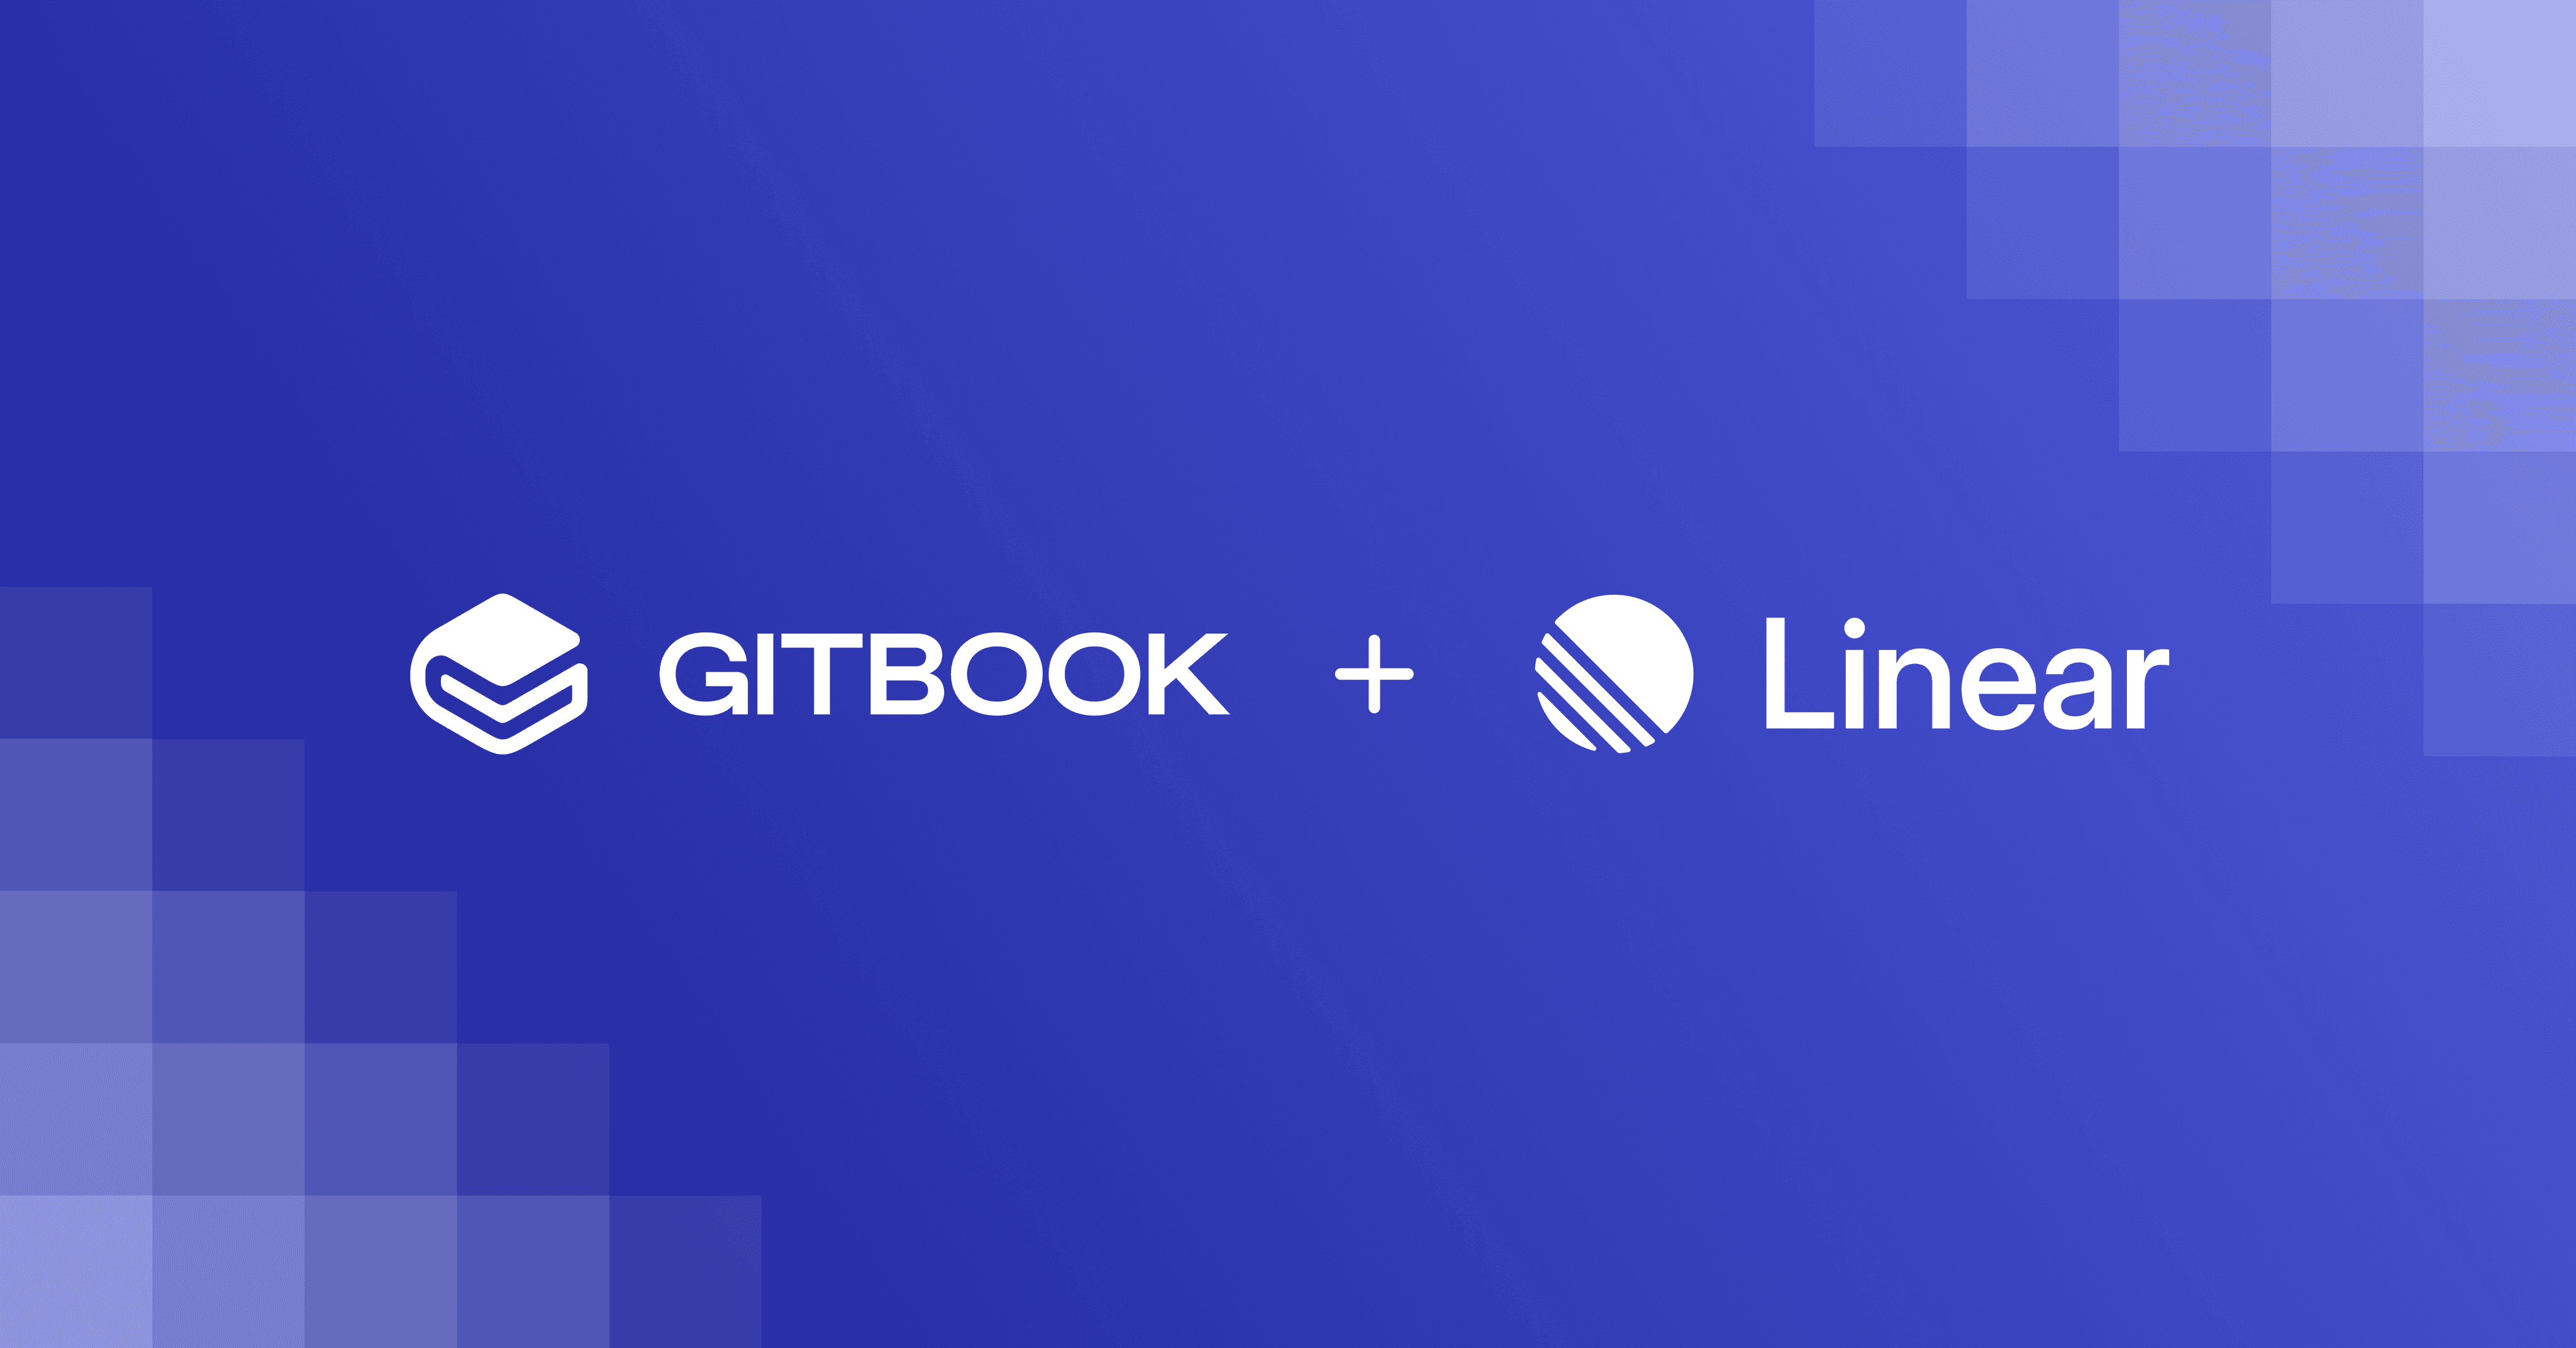 An illustration showing the GitBook and Linear logos on a blue background